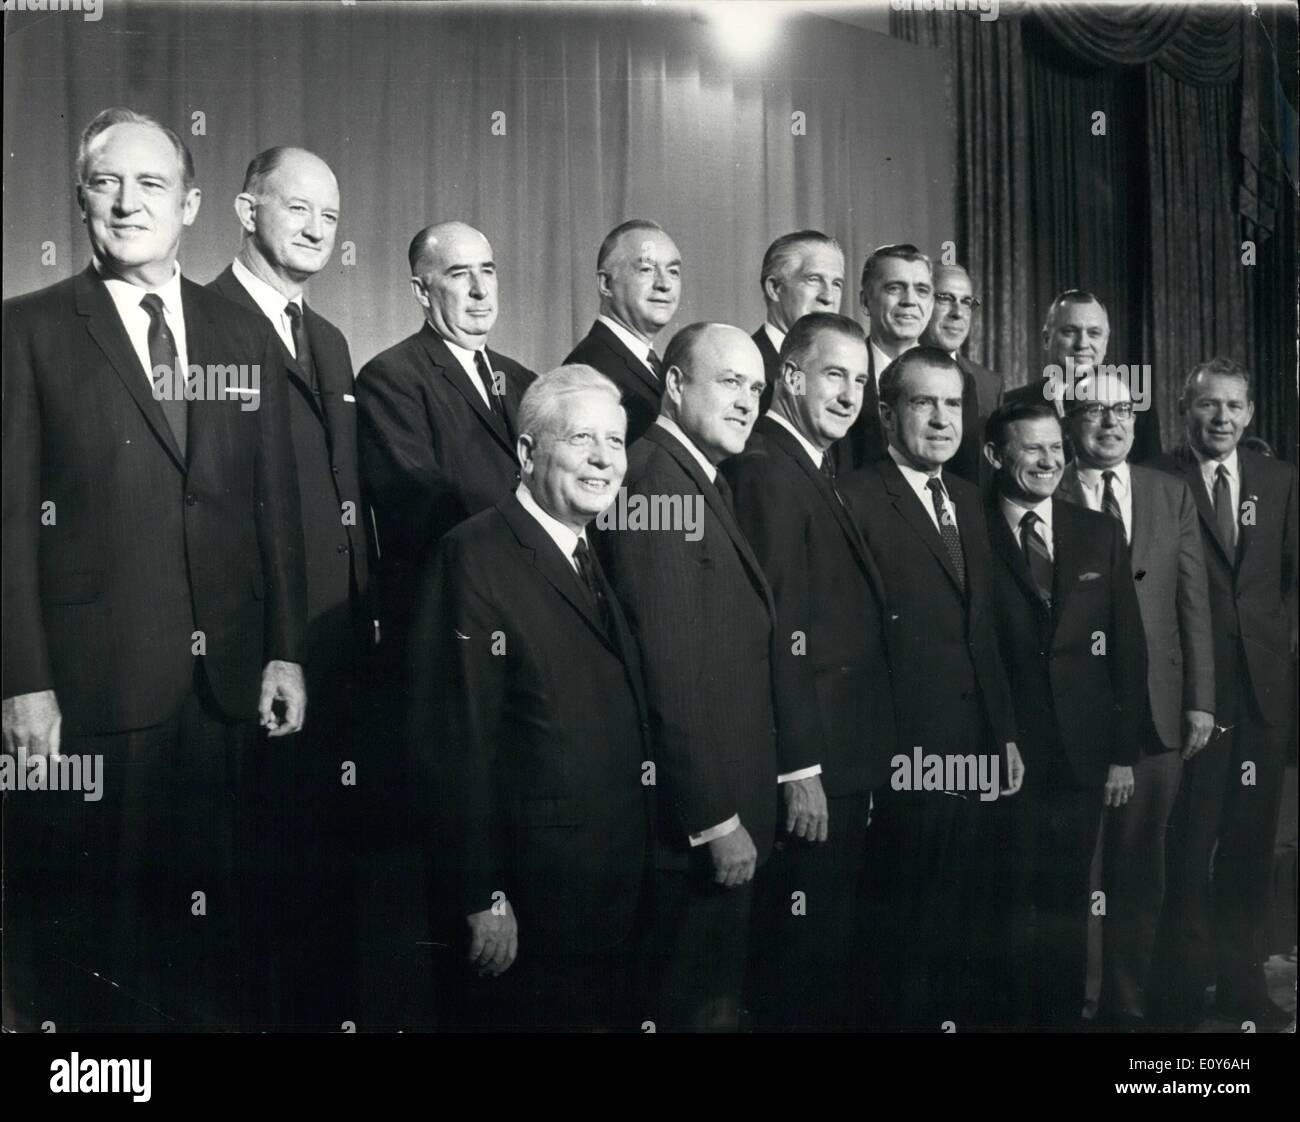 Dec. 12, 1968 - President-Elect Richard Nixon and his cabinet officer designees: Photo shows L-R Front row David M Kennedy, Treasury, Rep Melvin R. Laird, Defense. Vice-President Agnew, Nixon, John A Volpe, Transport, Robert Mayo, Budget, Robert H. Finch, Health and Education. Back row. L-R:William P. Rogers, state, Winton M. Blount, Postmaster General. John N. Mitchell, Attorney General. Maurice Stans, Commerce. Michigan Gov George Romney, Housing. Cliford M. Harding. Agriculture. George P. Shultz, Labour. and Walter J. Hickel, Interior. Stock Photo